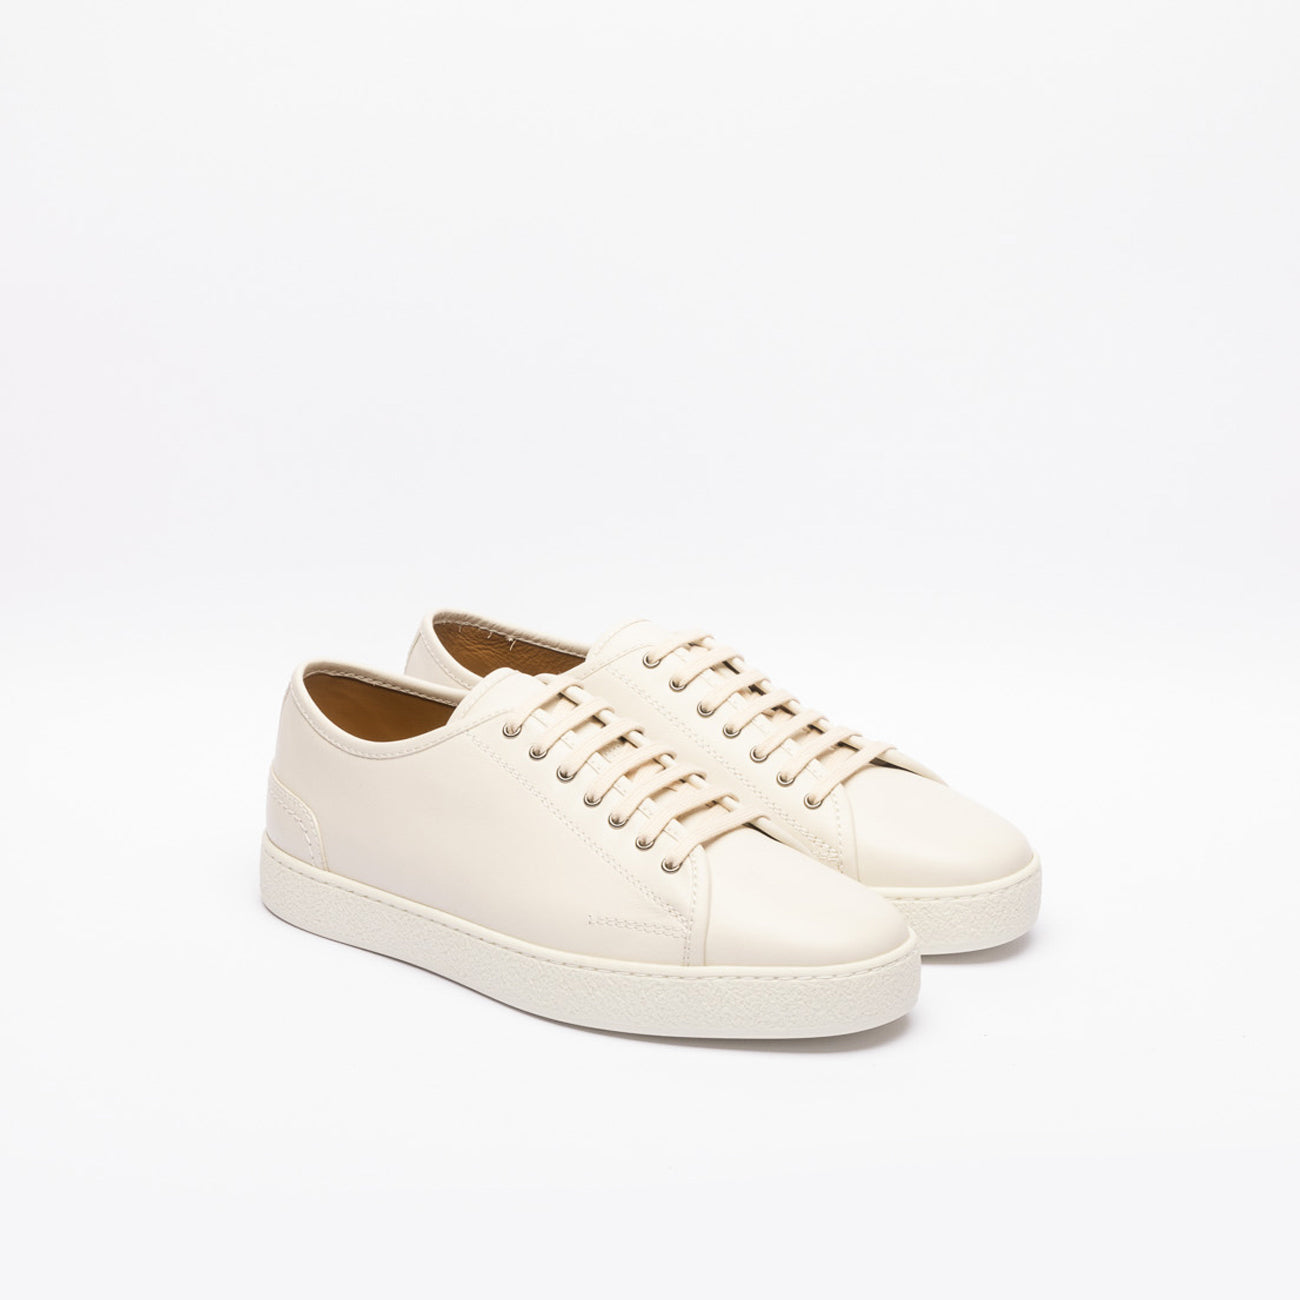 John Lobb Stockwell low-top sneakers in white leather